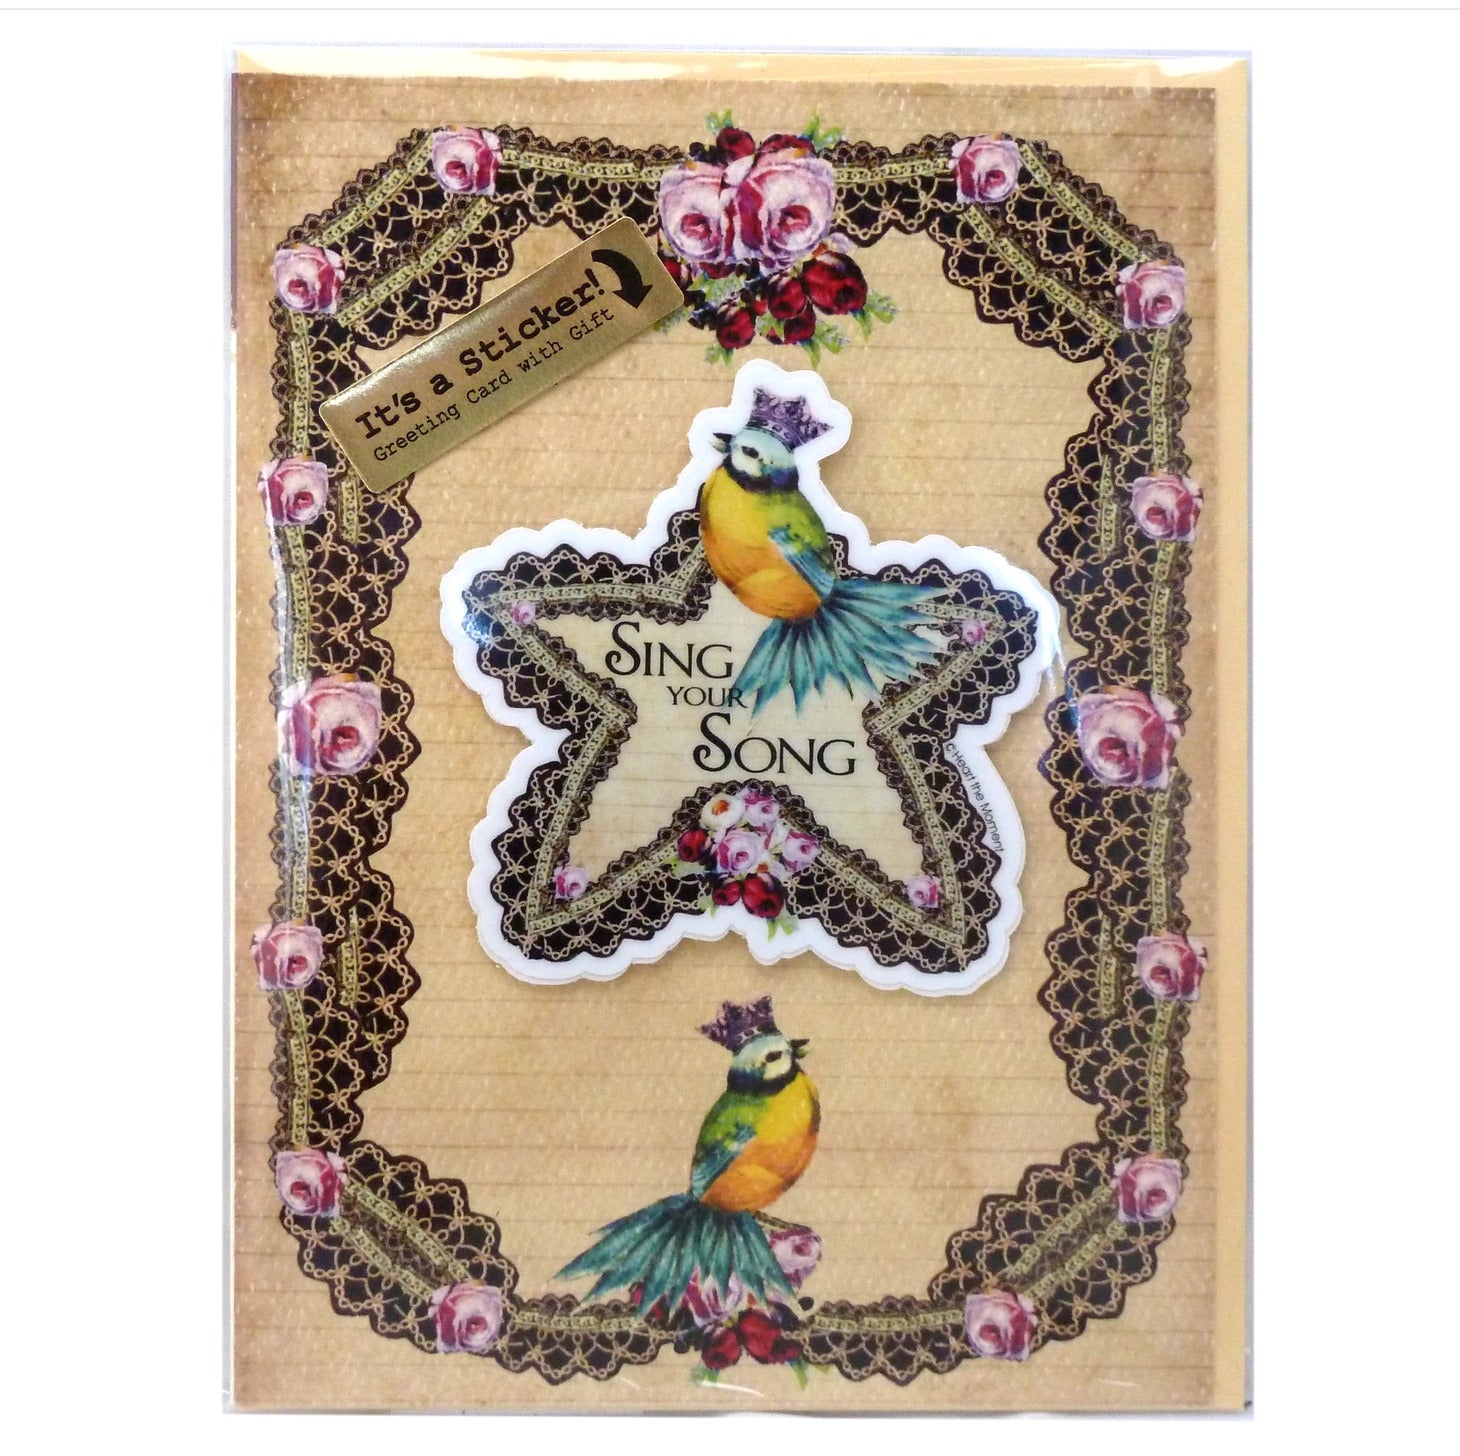 “Sing Your Song” Greeting Card with Detachable Vinyl Sticker - A